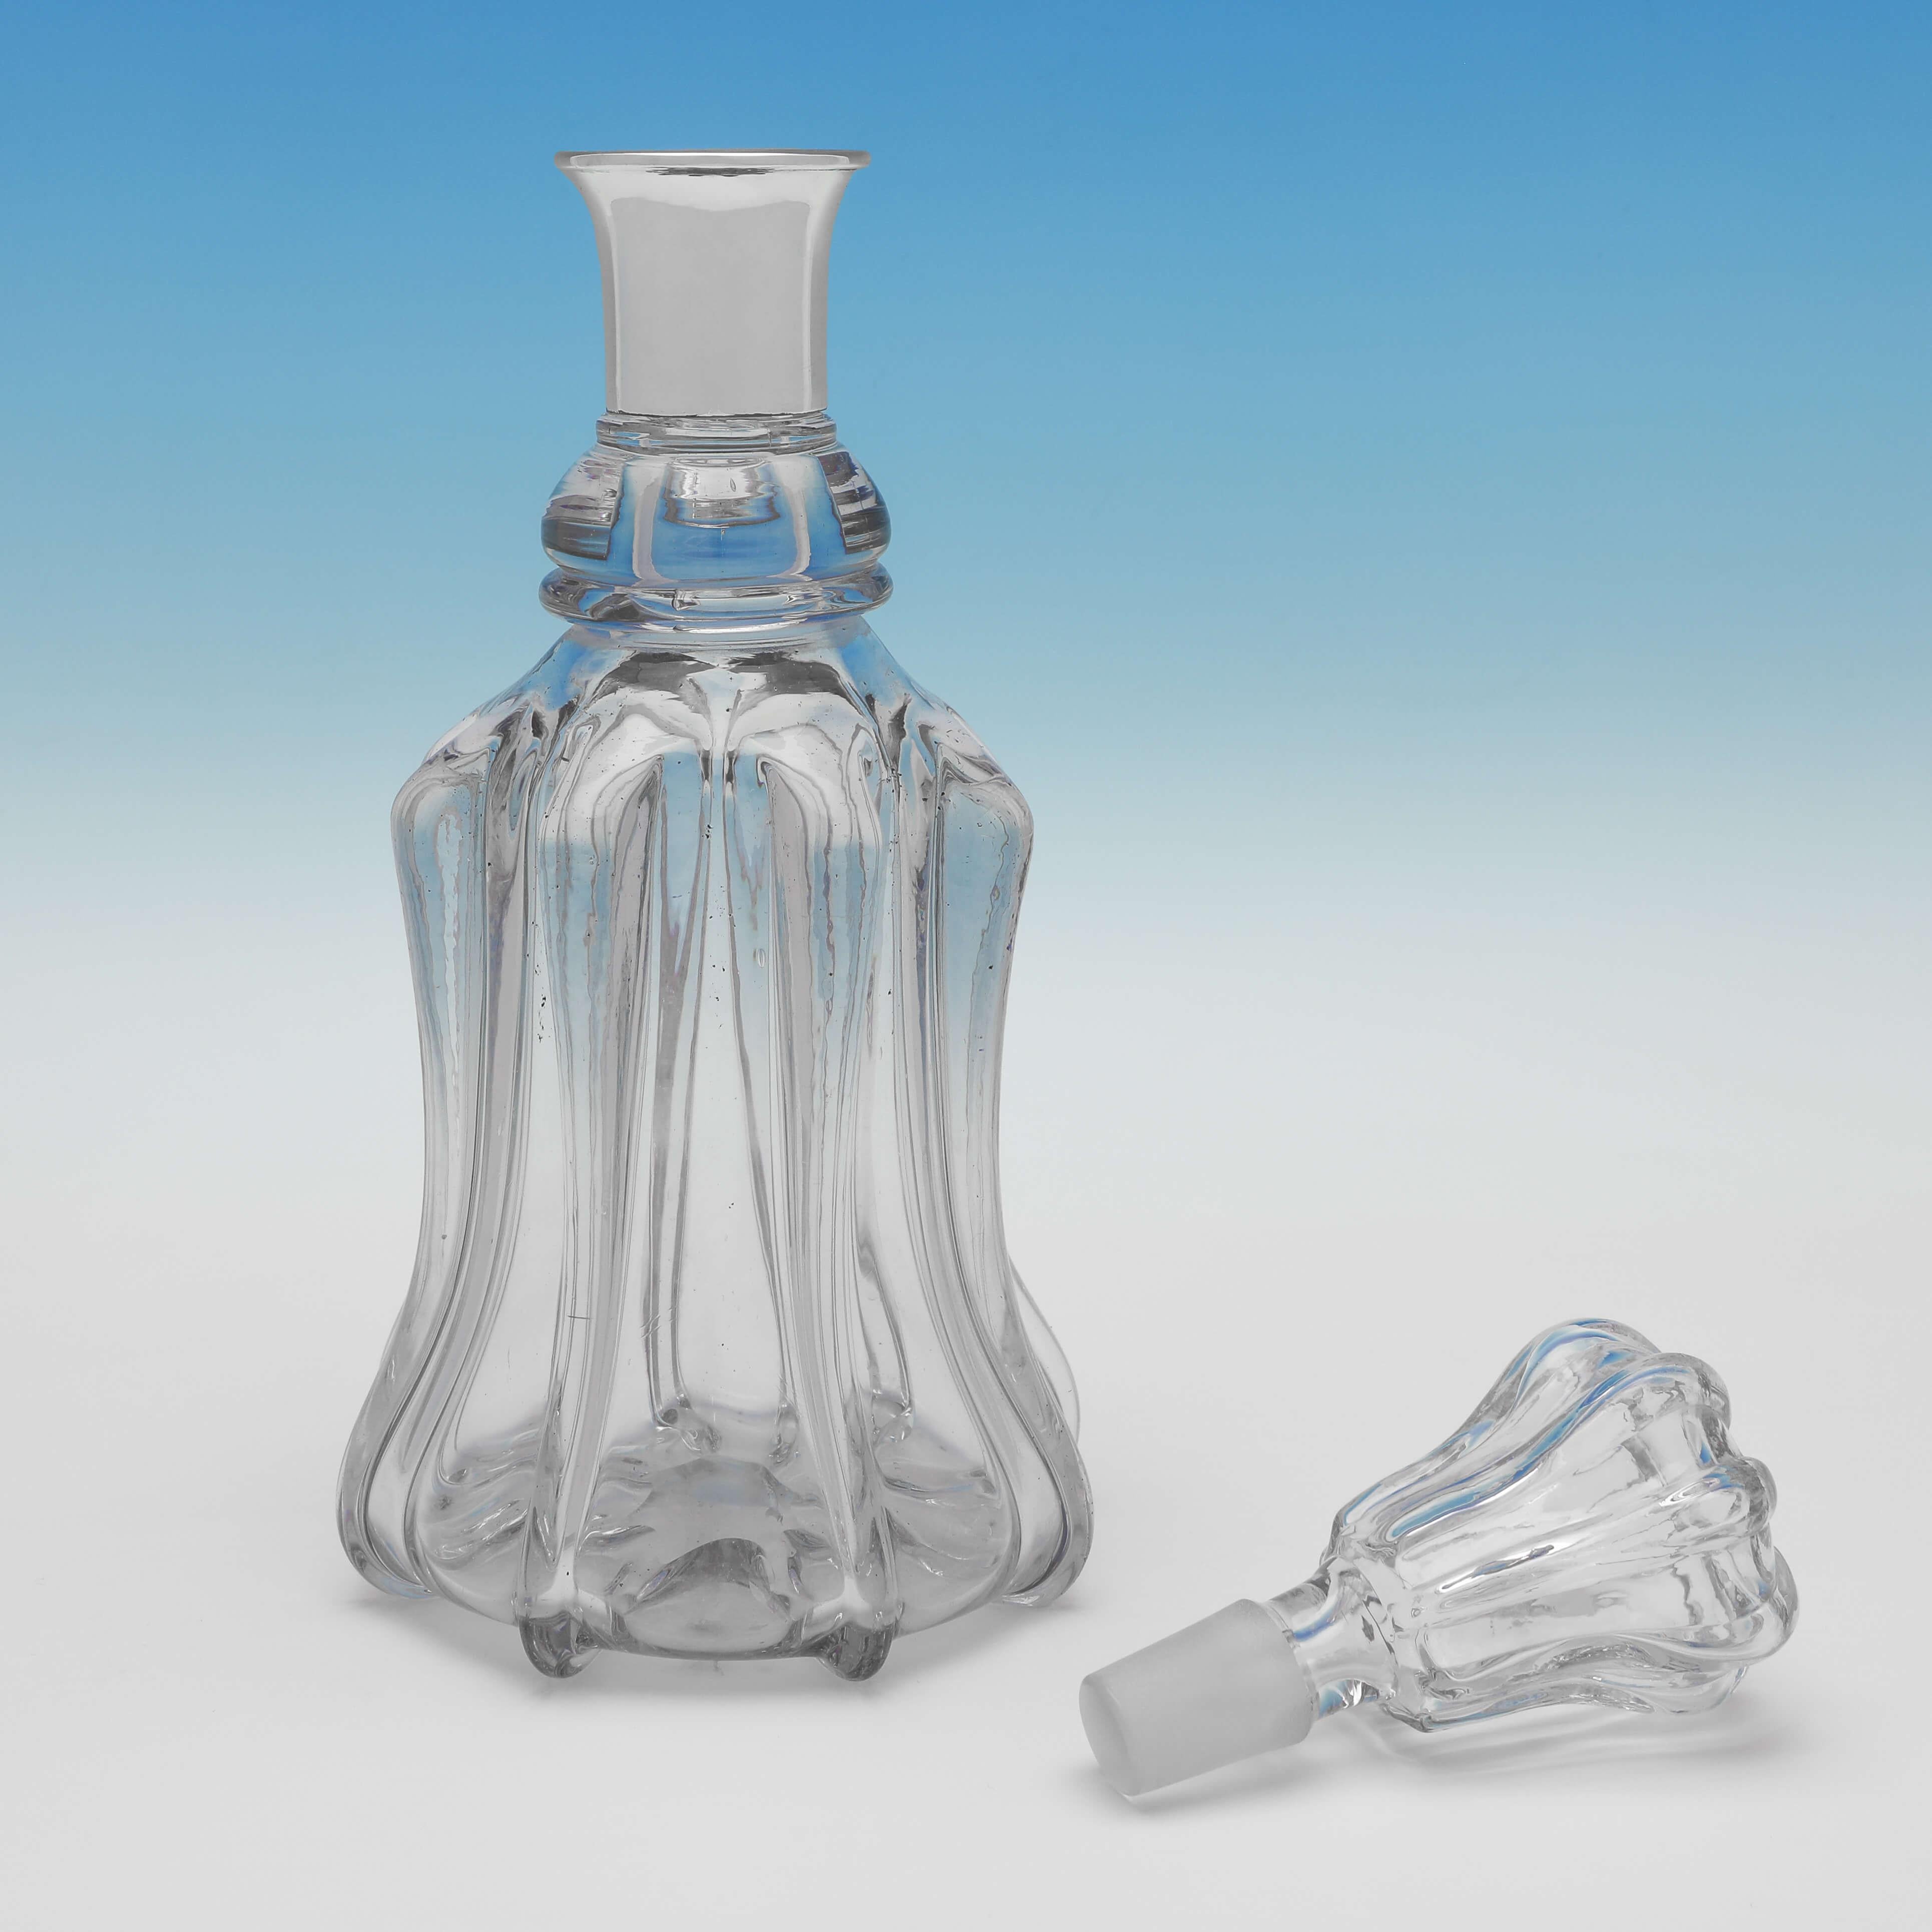 Hallmarked in Sheffield in 1956 by Mappin & Webb, this handsome, Mid-Century Modern, glass and sterling silver decanter, has a lobed glass body and stopper, and a silver collar. The decanter measures 11